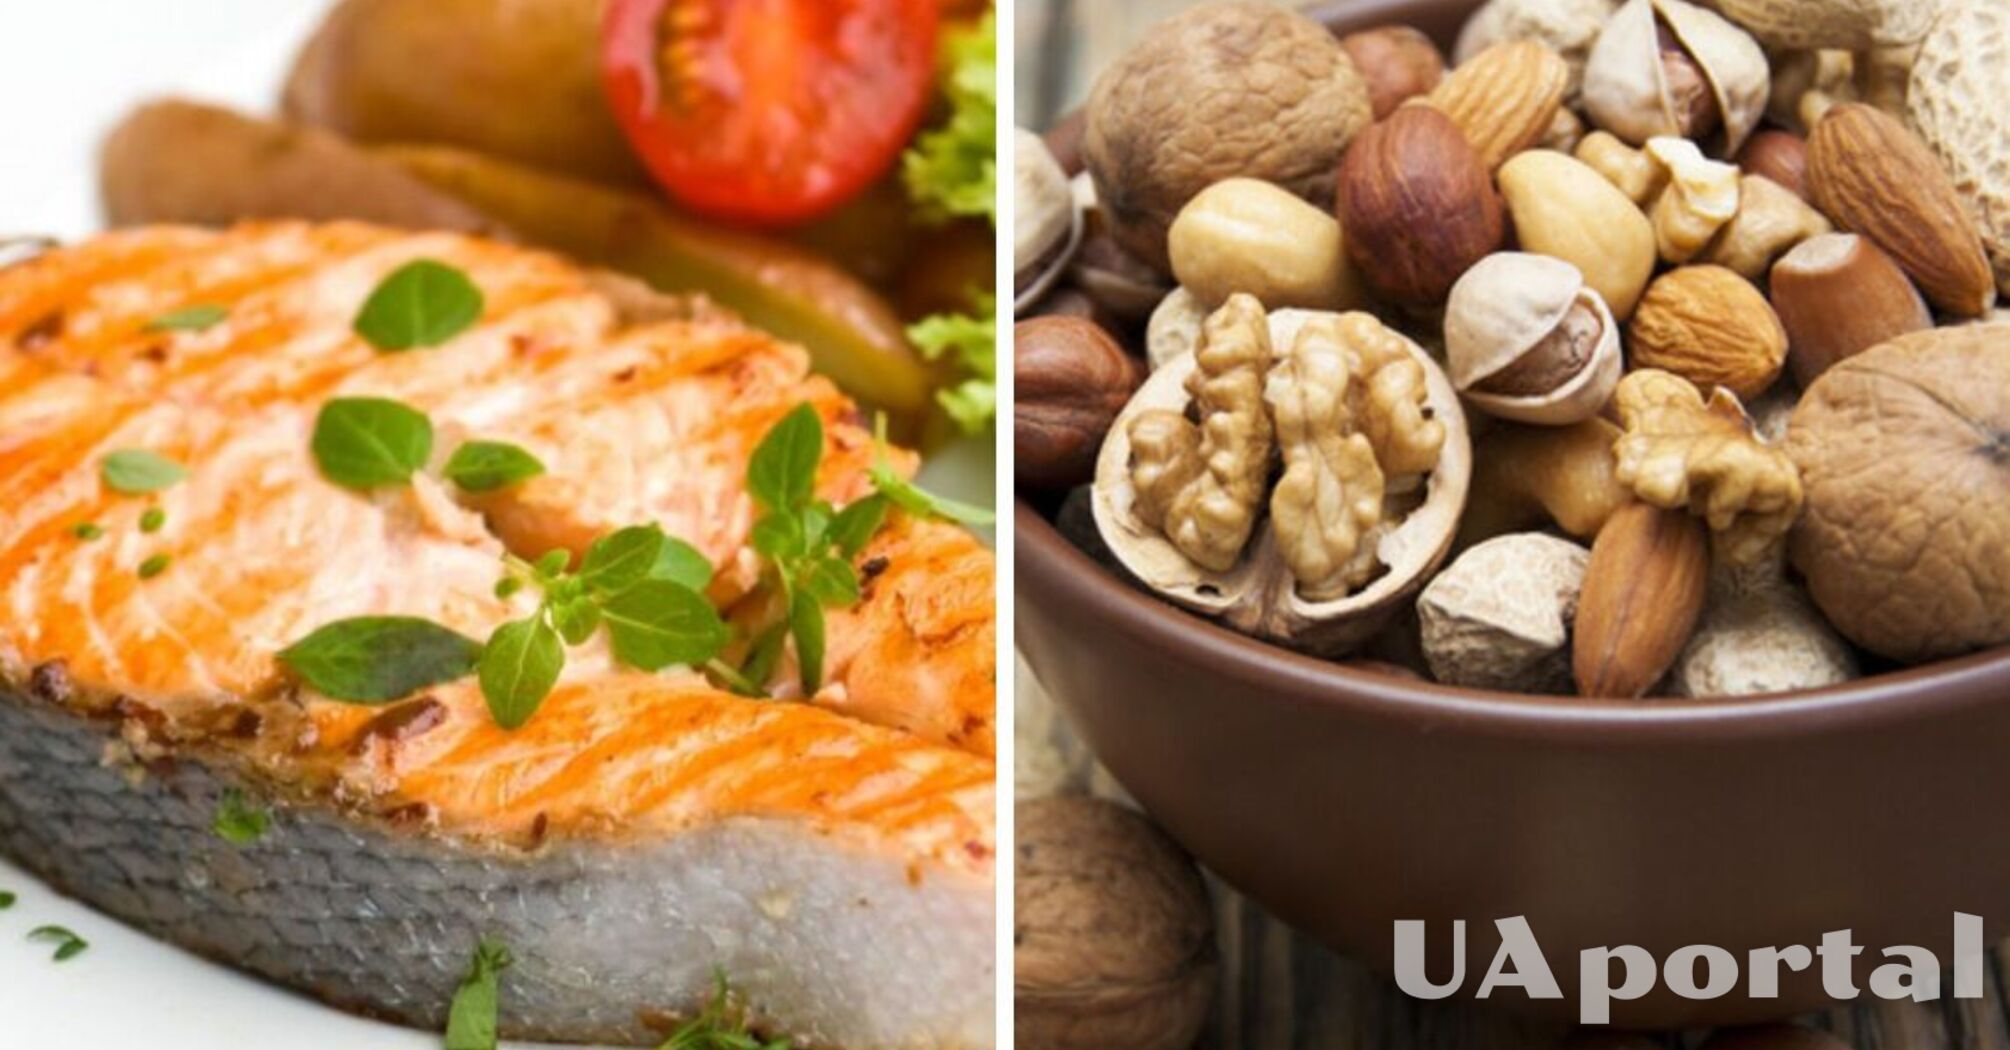 What are the benefits of oily fish and nuts and seeds